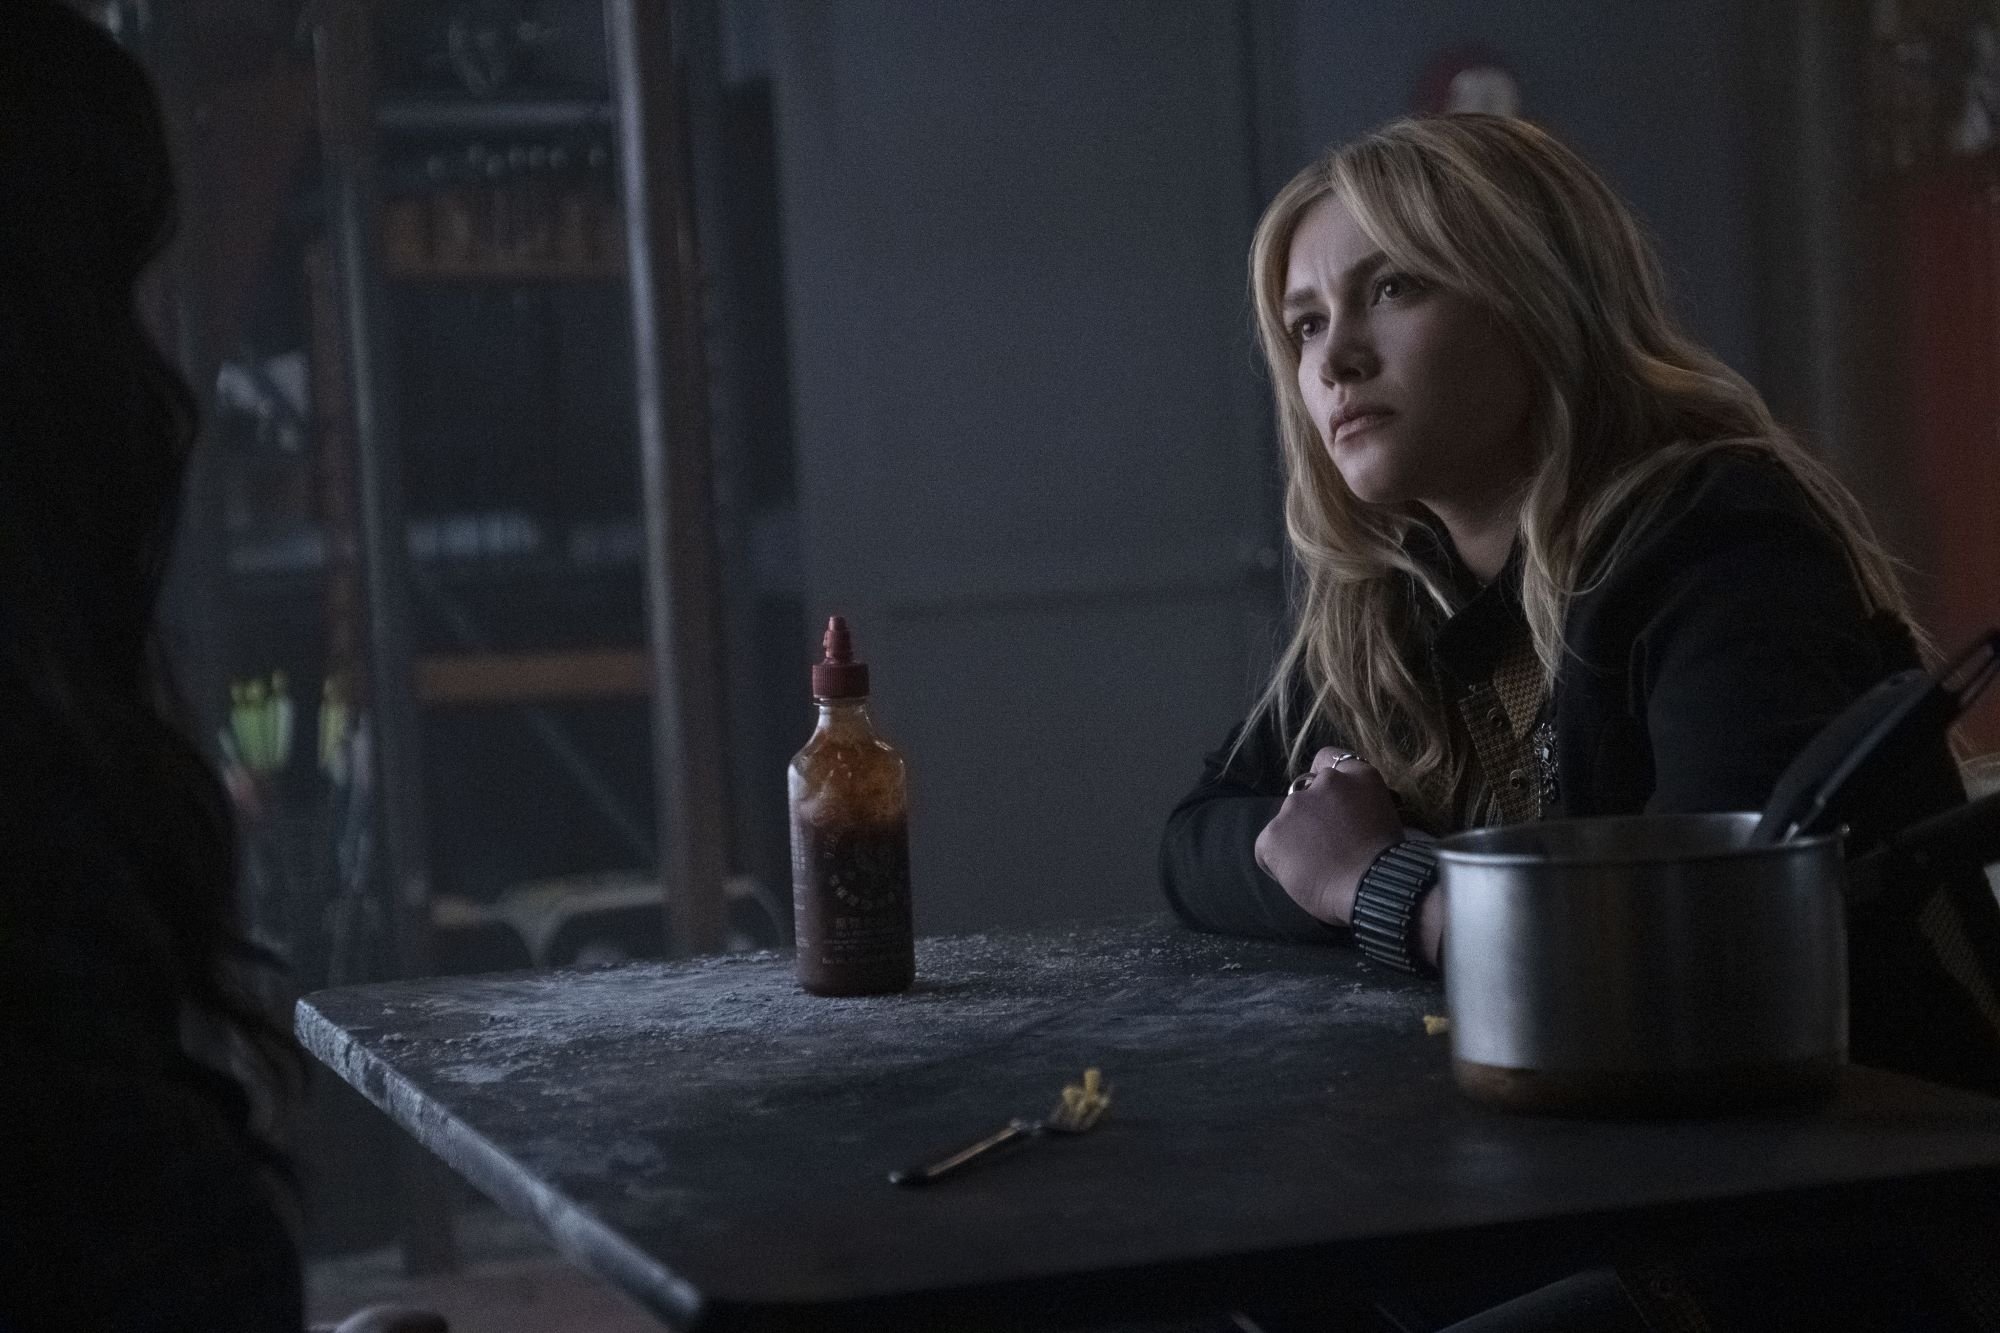 'Hawkeye' star Florence Pugh, in character as Yelena Belova, acts opposite of Hailee Steinfeld's character Kate Bishop in episode 5 in the mac and cheese scene. Yelena wears a black and brown jacket and sits at a table with a pot of mac and cheese and a bottle of hot sauce on it.